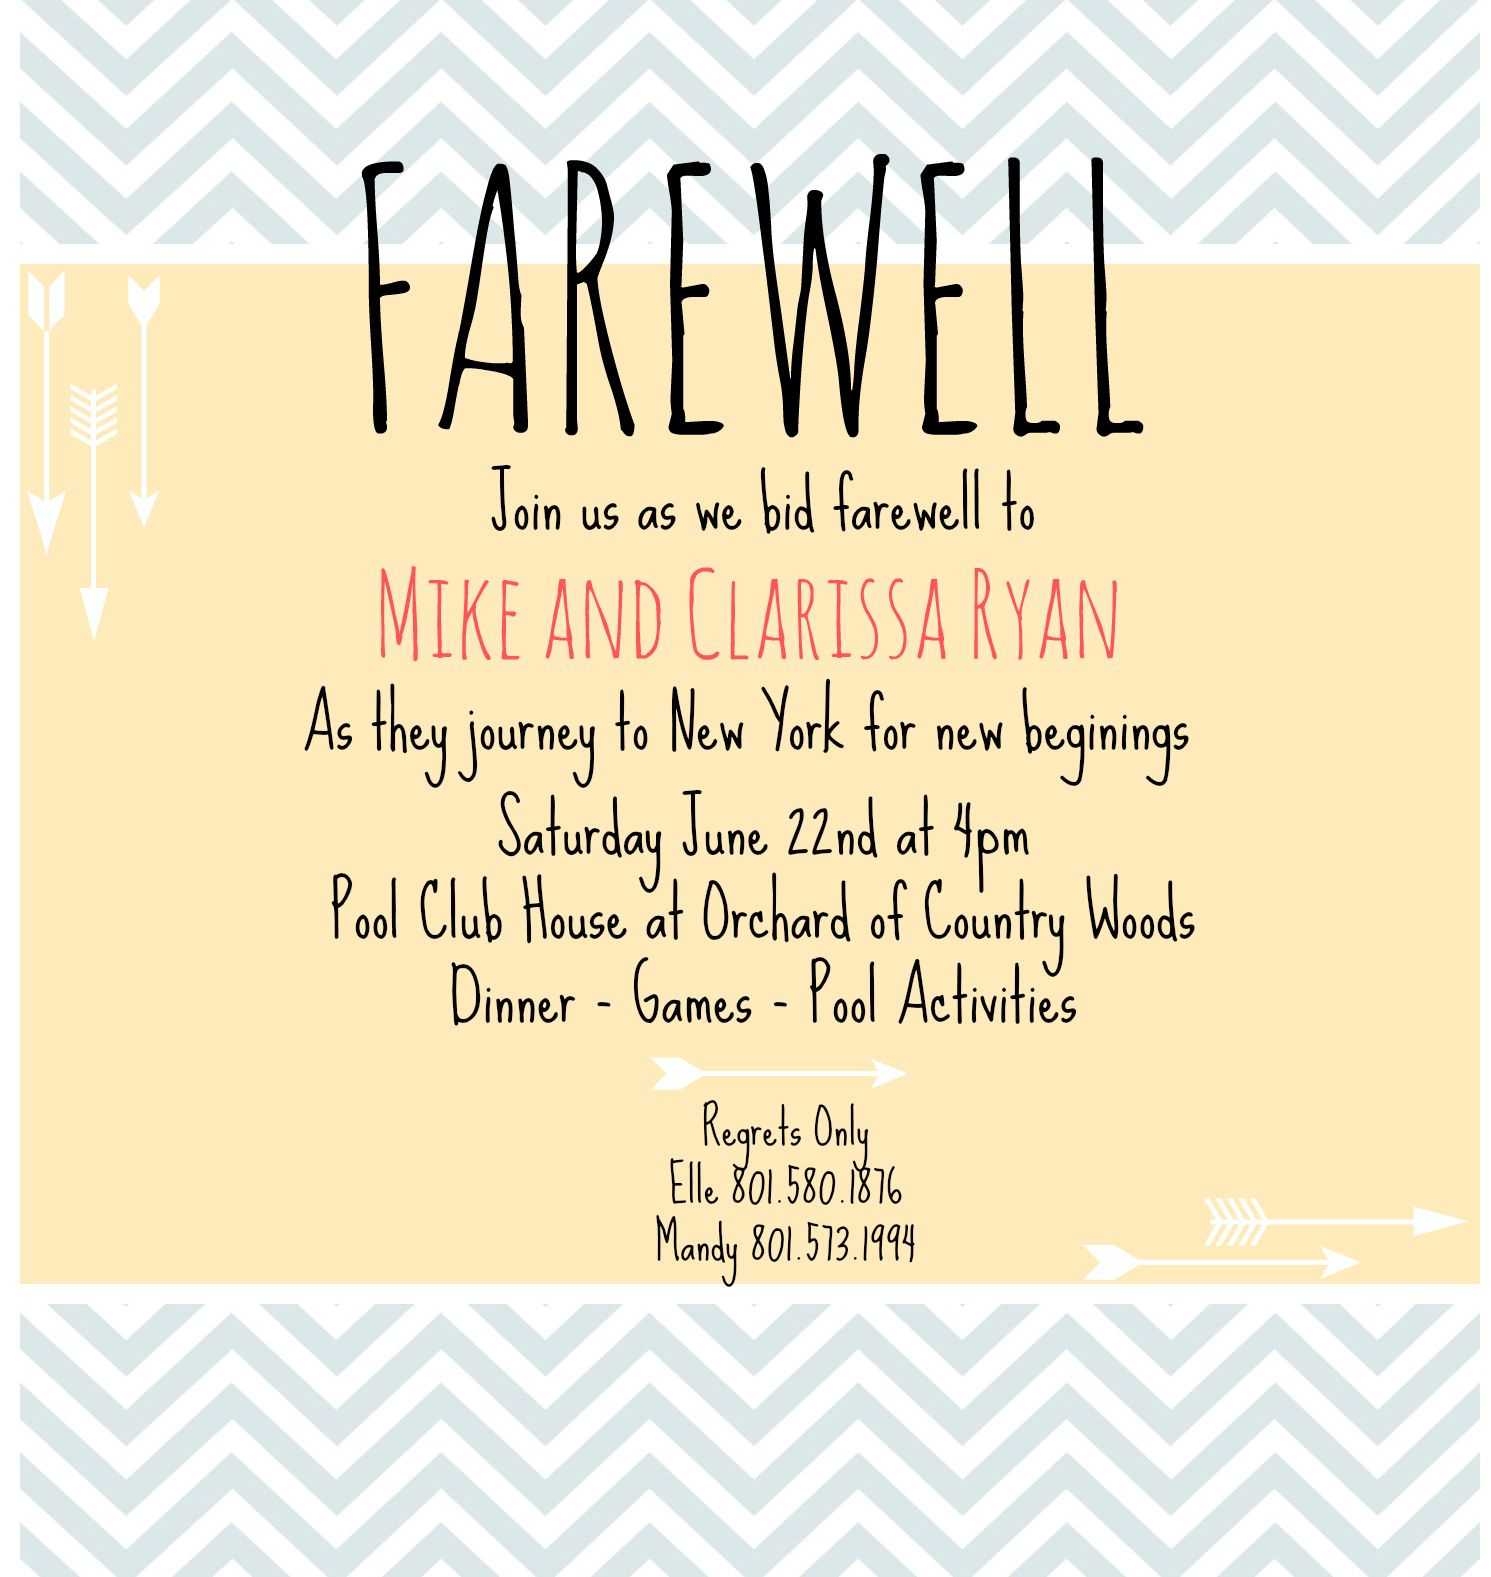 Farewell Invite | Farewell Party Invitations, Going Away Throughout Farewell Invitation Card Template